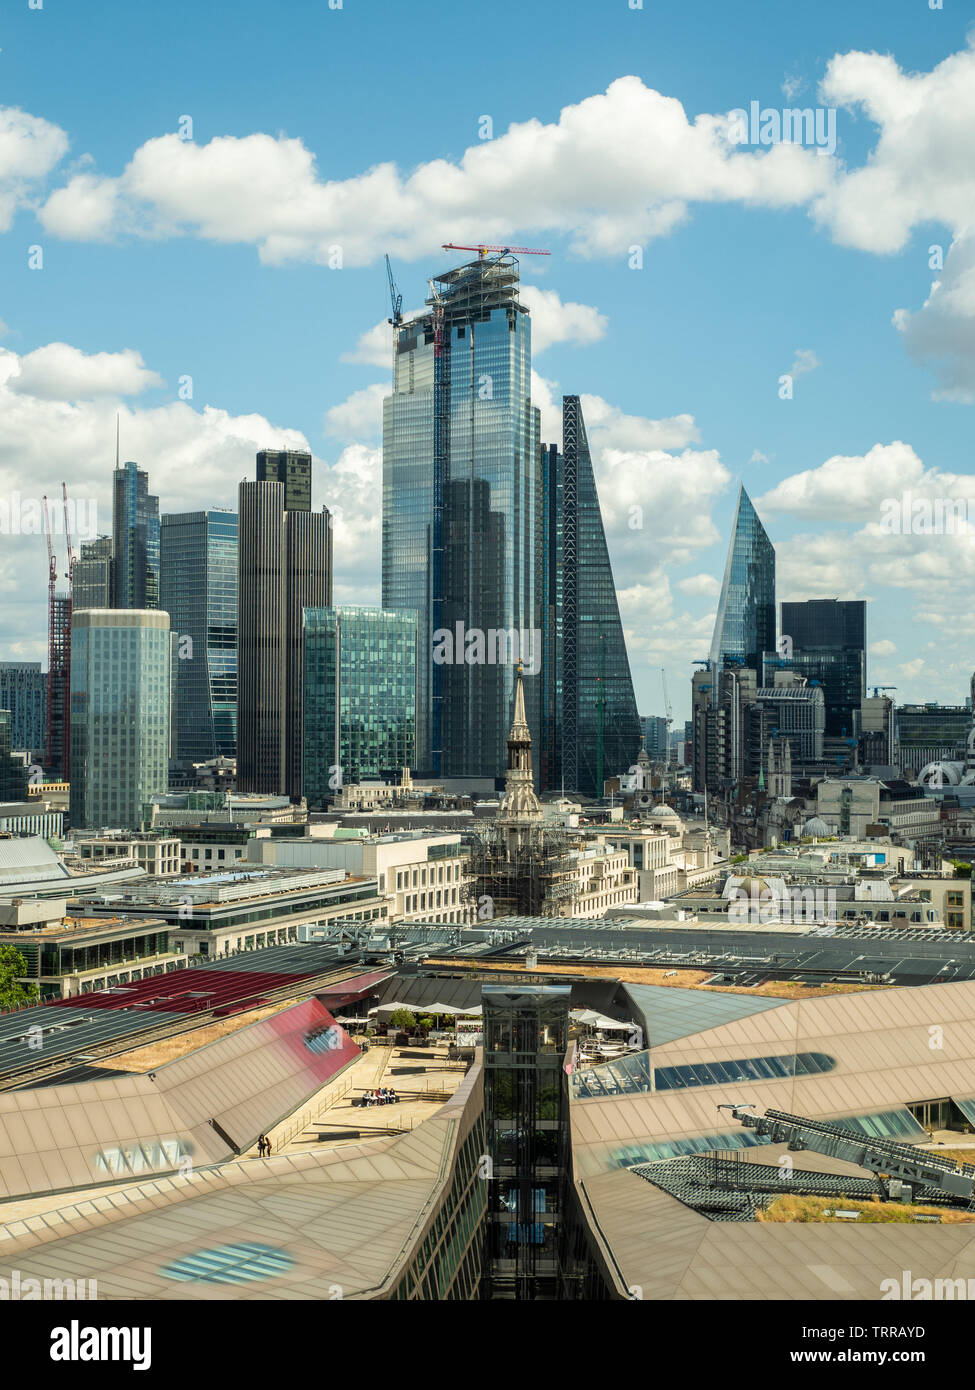 View from St Pauls Cathedra with 'One New Change' bottom & skyscrapers in the background, London, England. Stock Photo